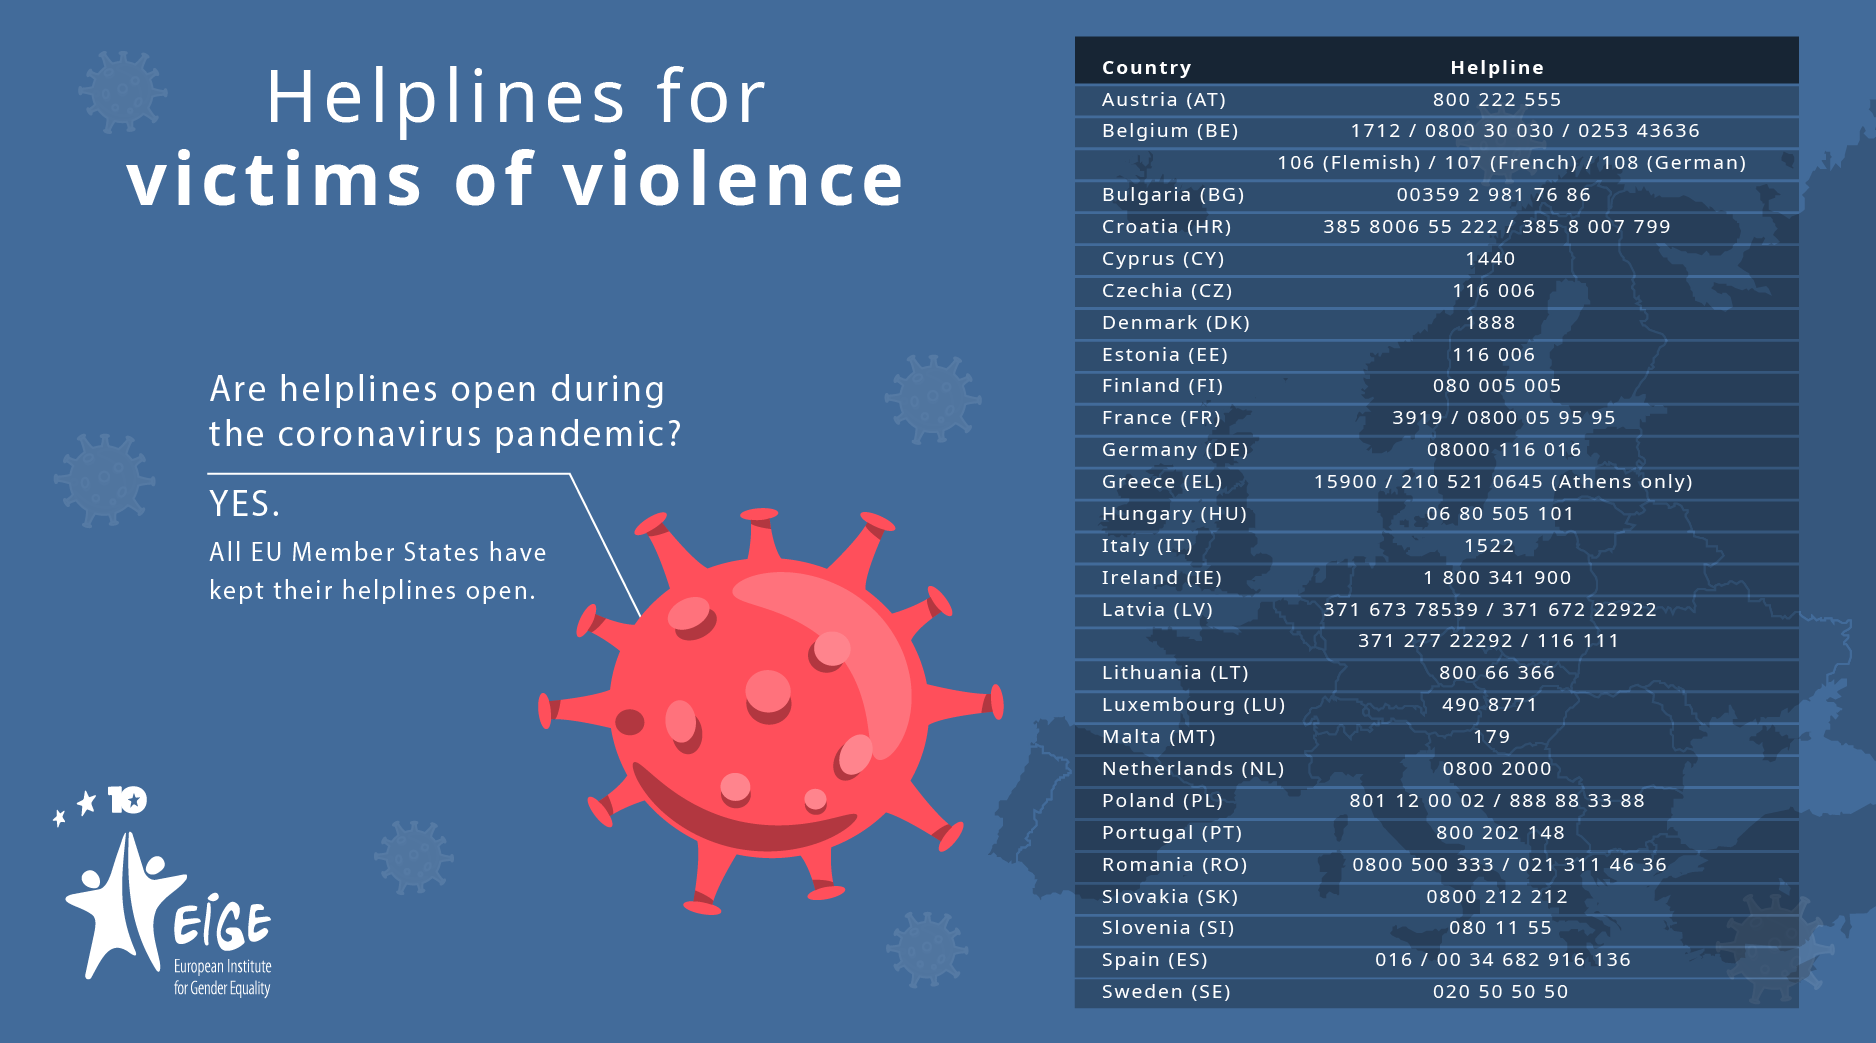 sydvest lige ud ligegyldighed Helplines for victims of violence during the coronavirus pandemic – ASTRAPI